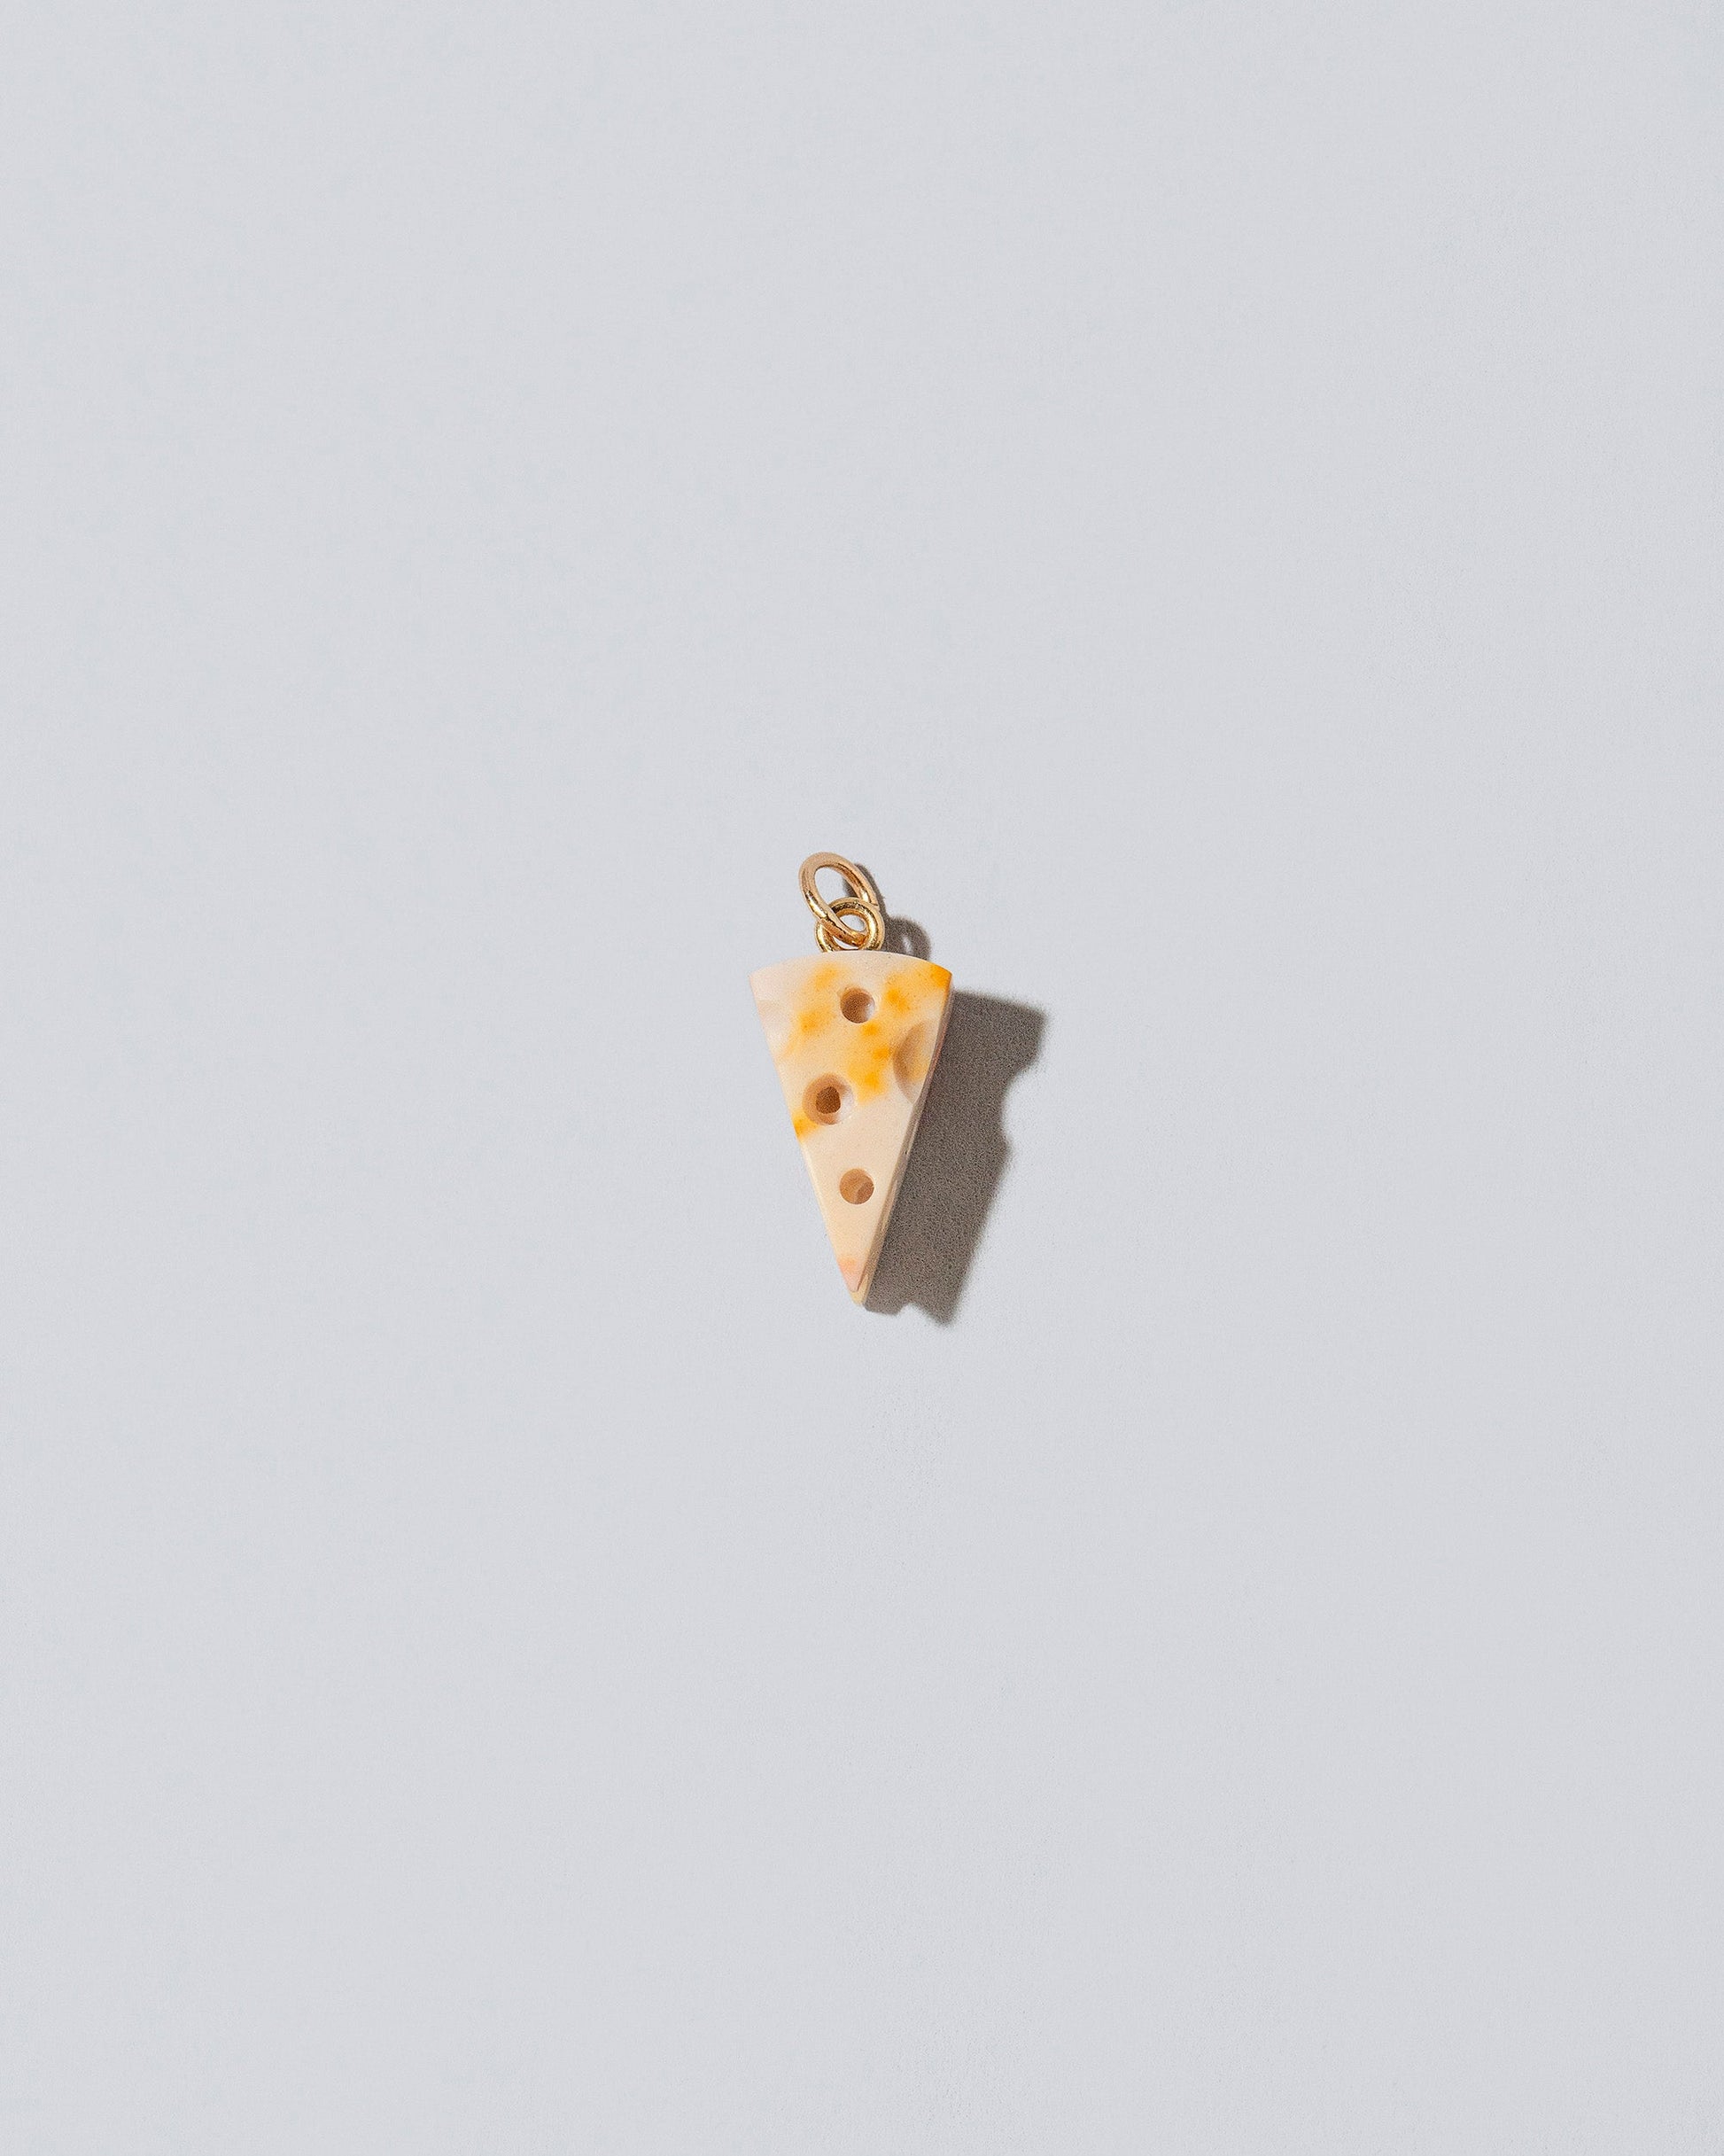  Swiss Cheese Charms on light color background.